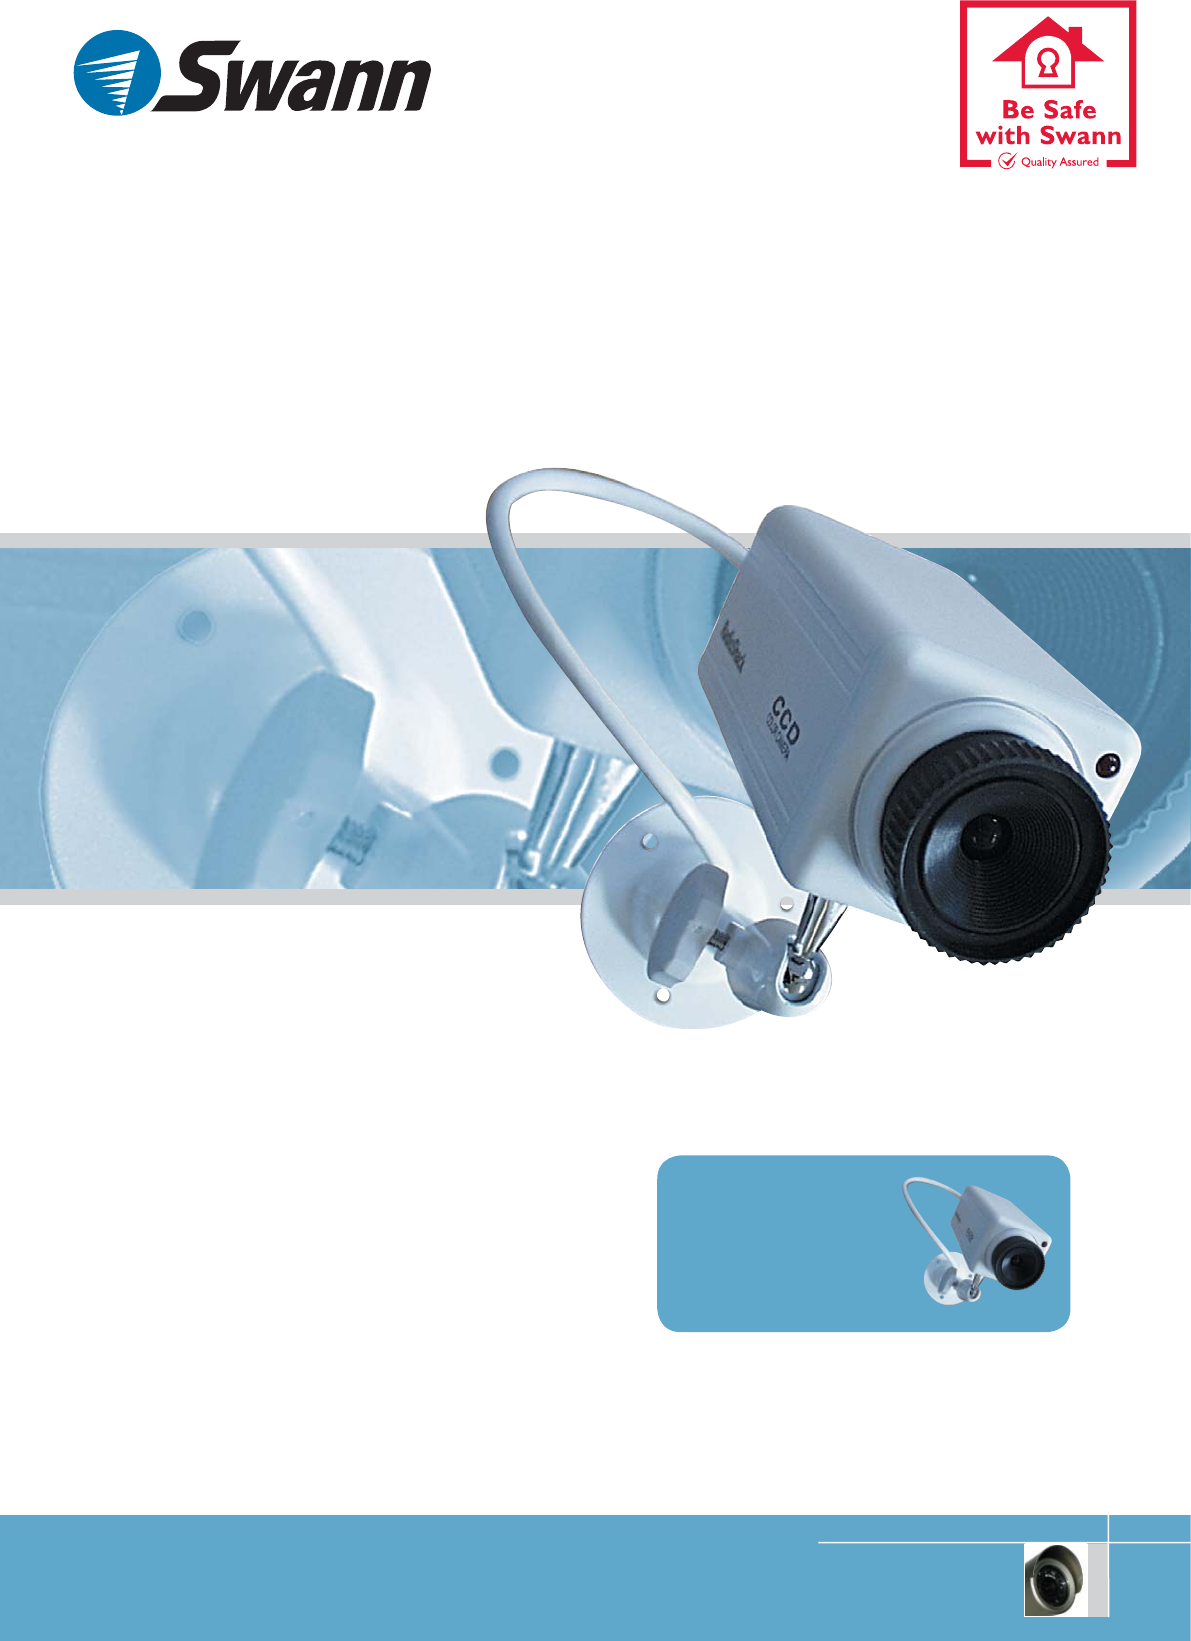 swann security systems help guide